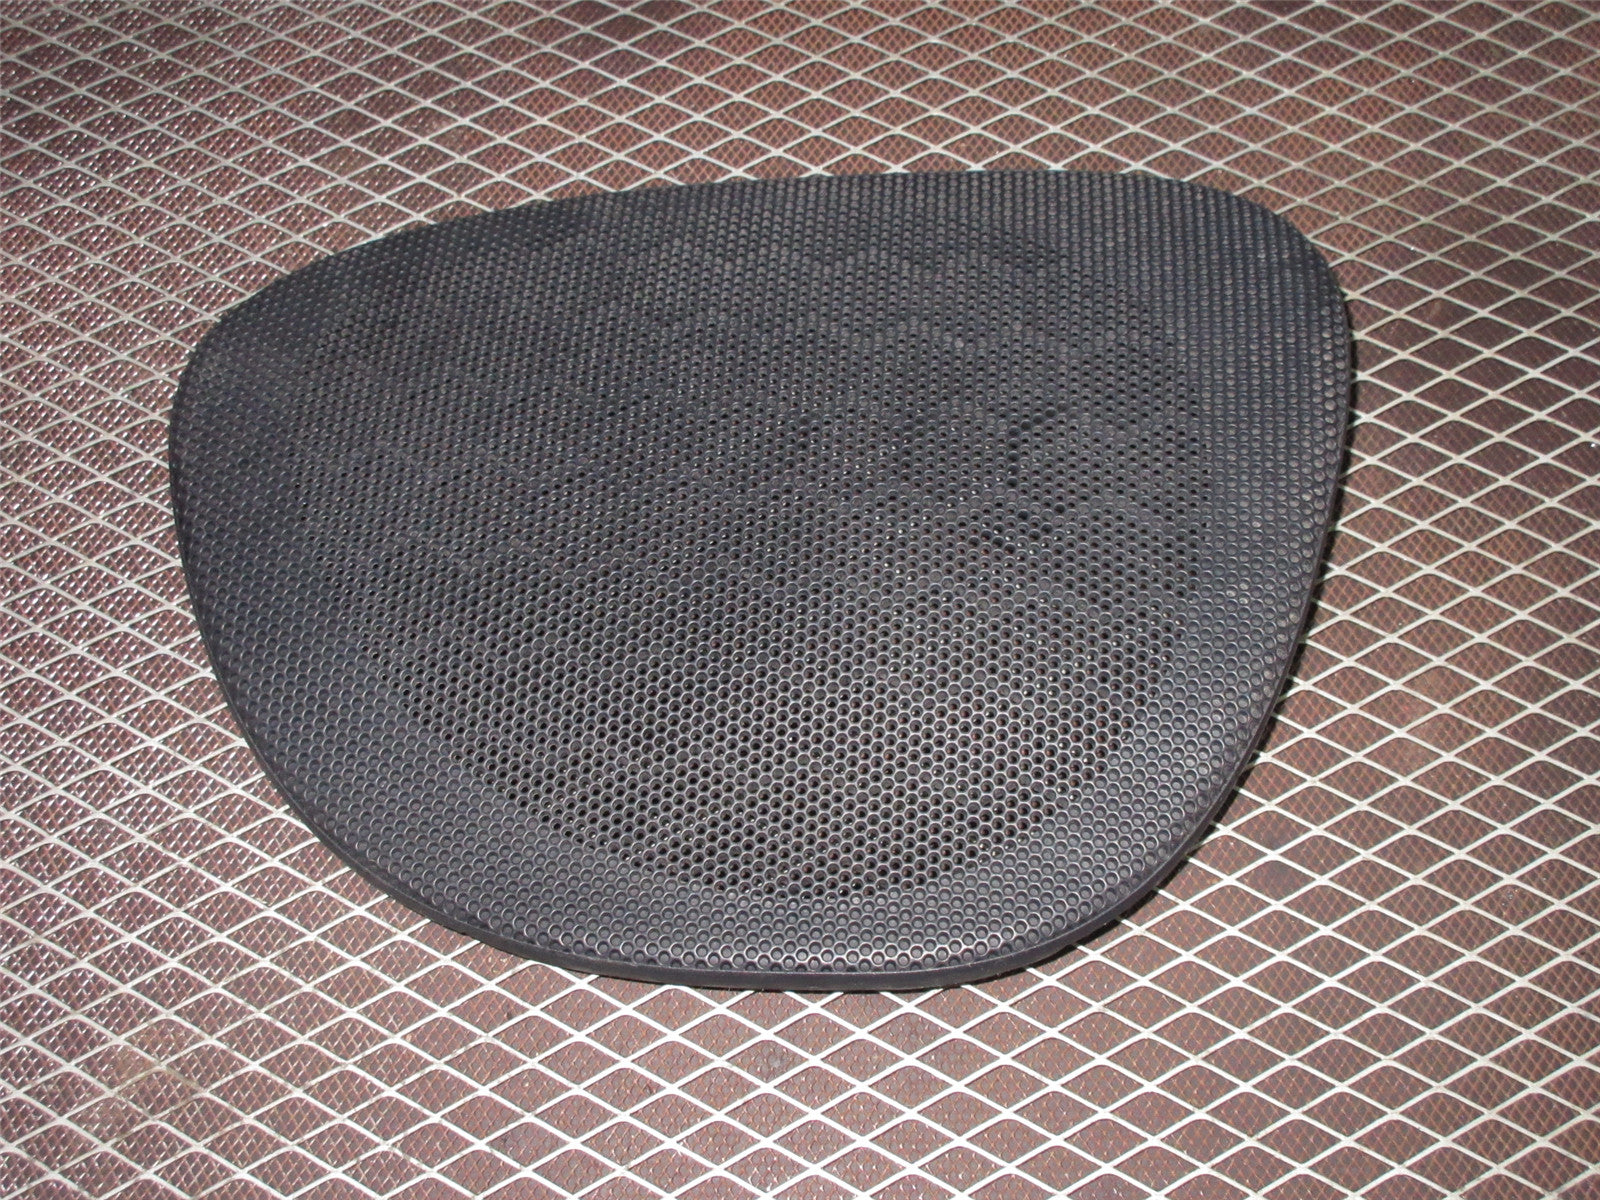 94 95 96 97 98 99 Toyota Coupe Celica Rear Speaker Grille Cover - Right